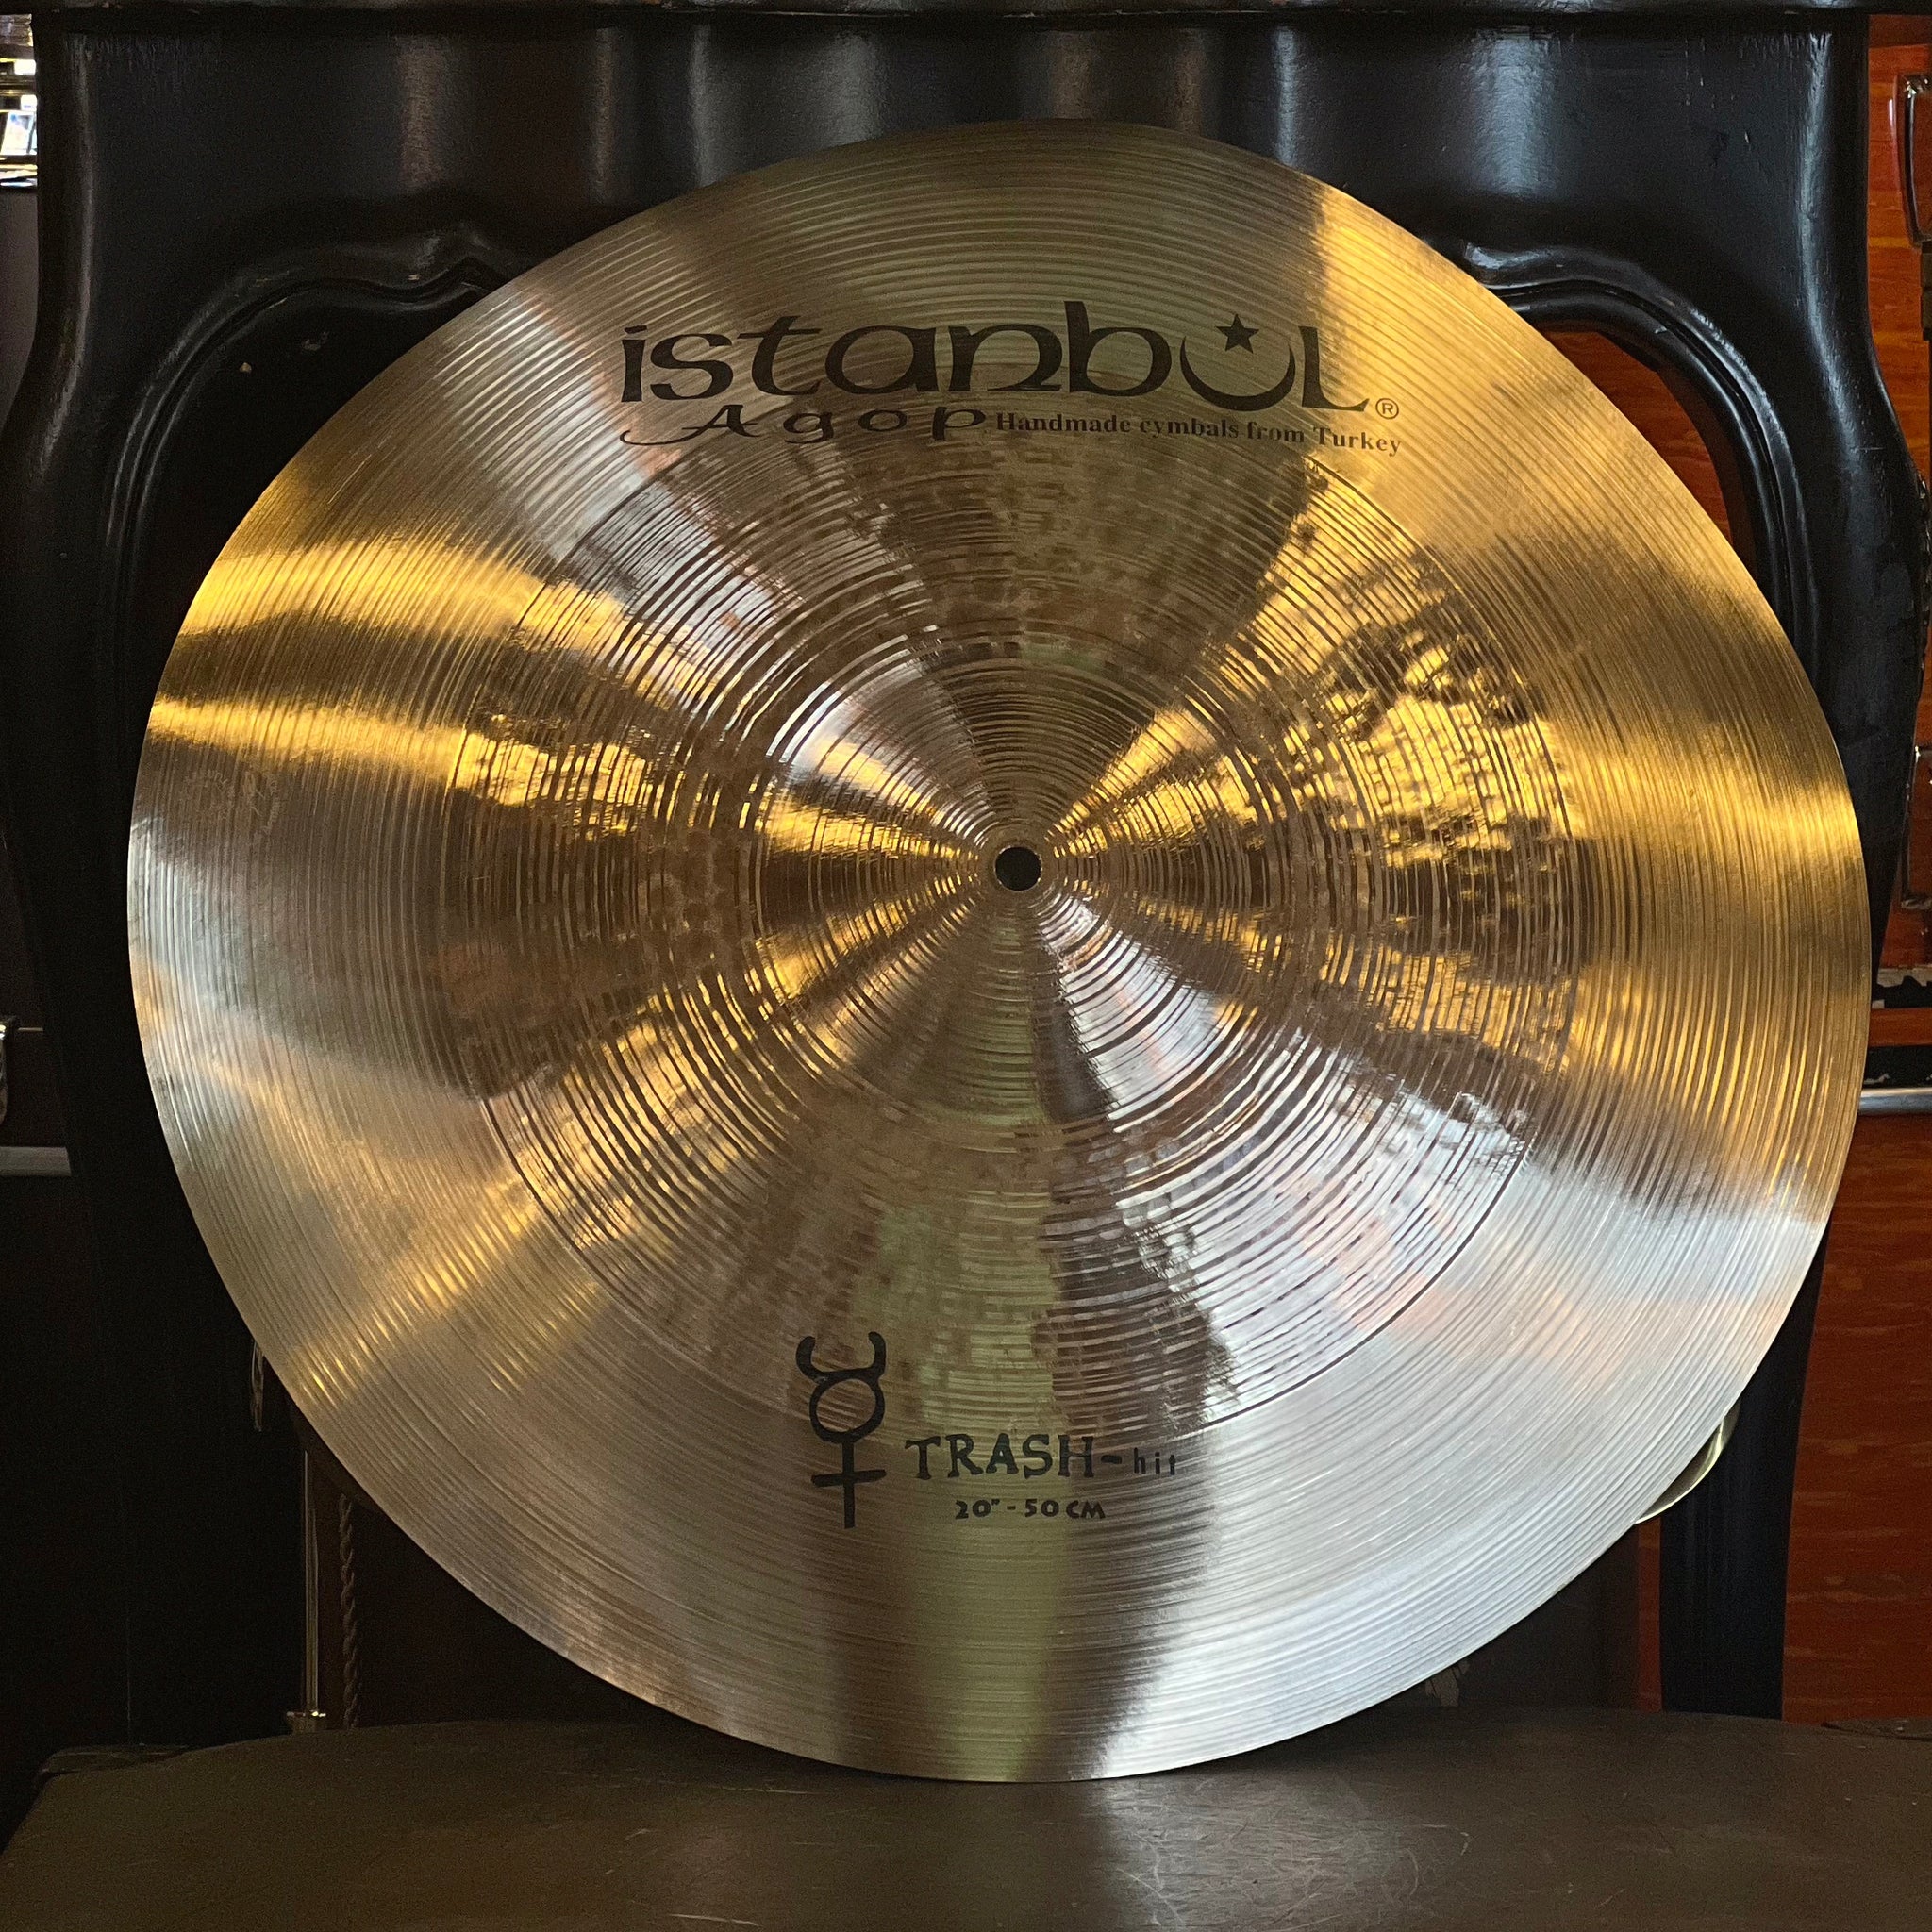 NEW Istanbul Agop 20" Traditional Trash Hit Cymbal - 1608g